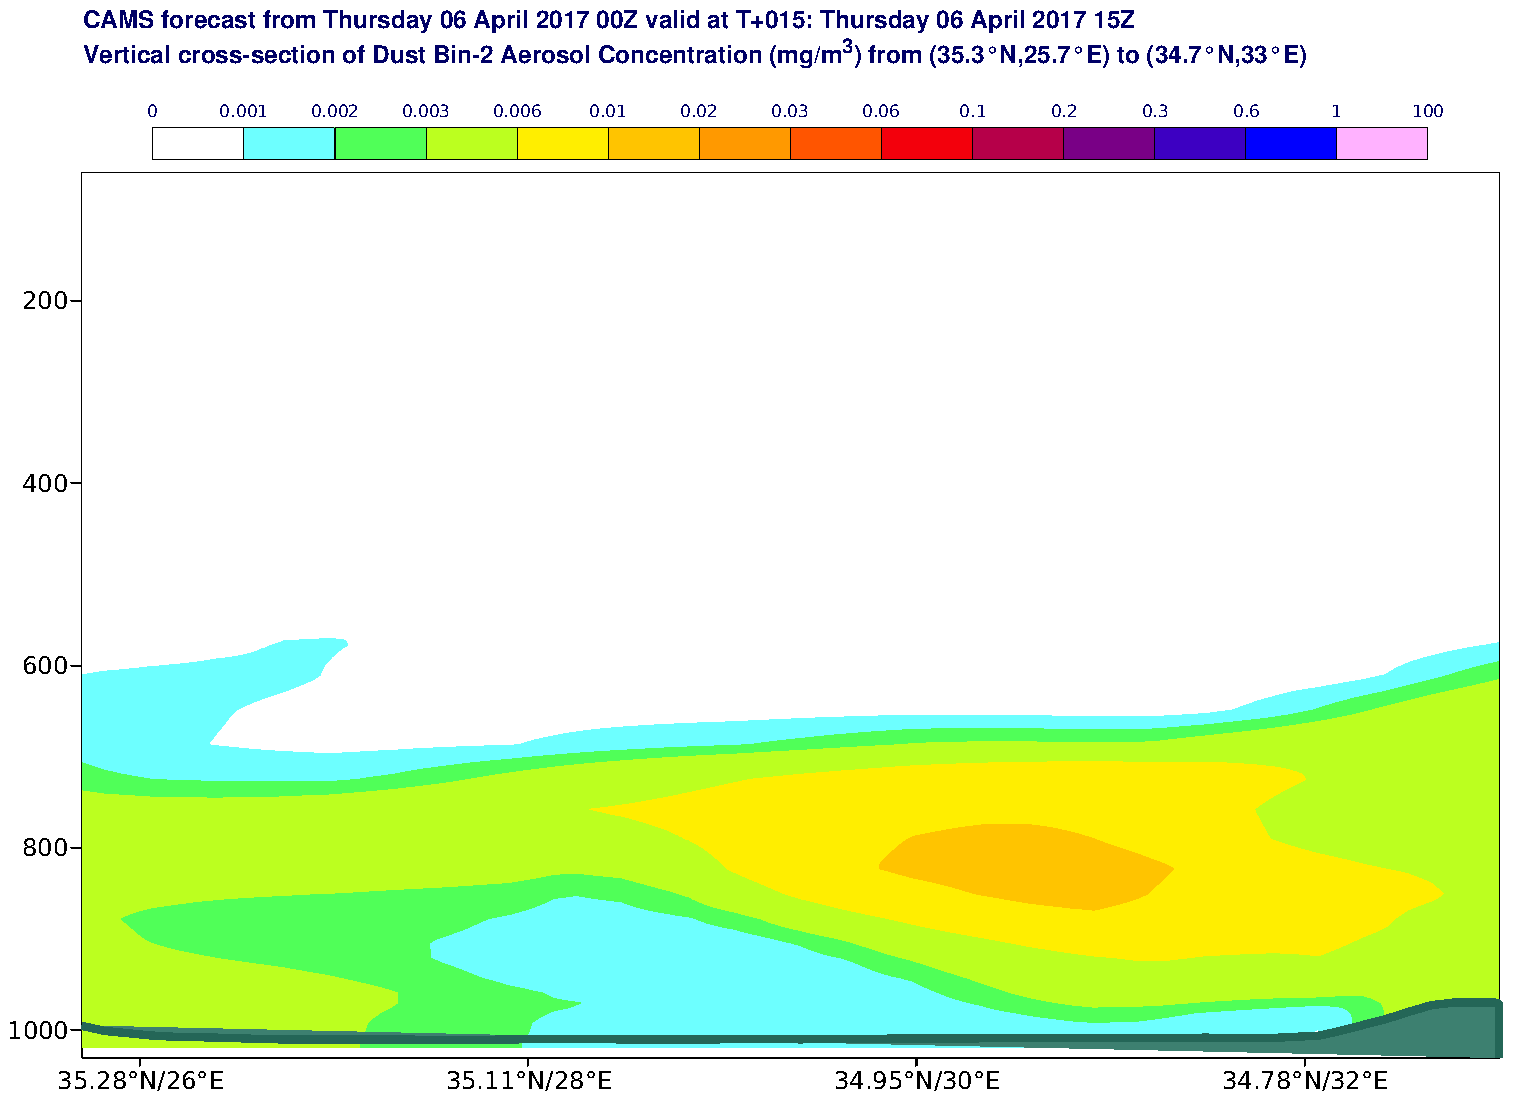 Vertical cross-section of Dust Bin-2 Aerosol Concentration (mg/m3) valid at T15 - 2017-04-06 15:00